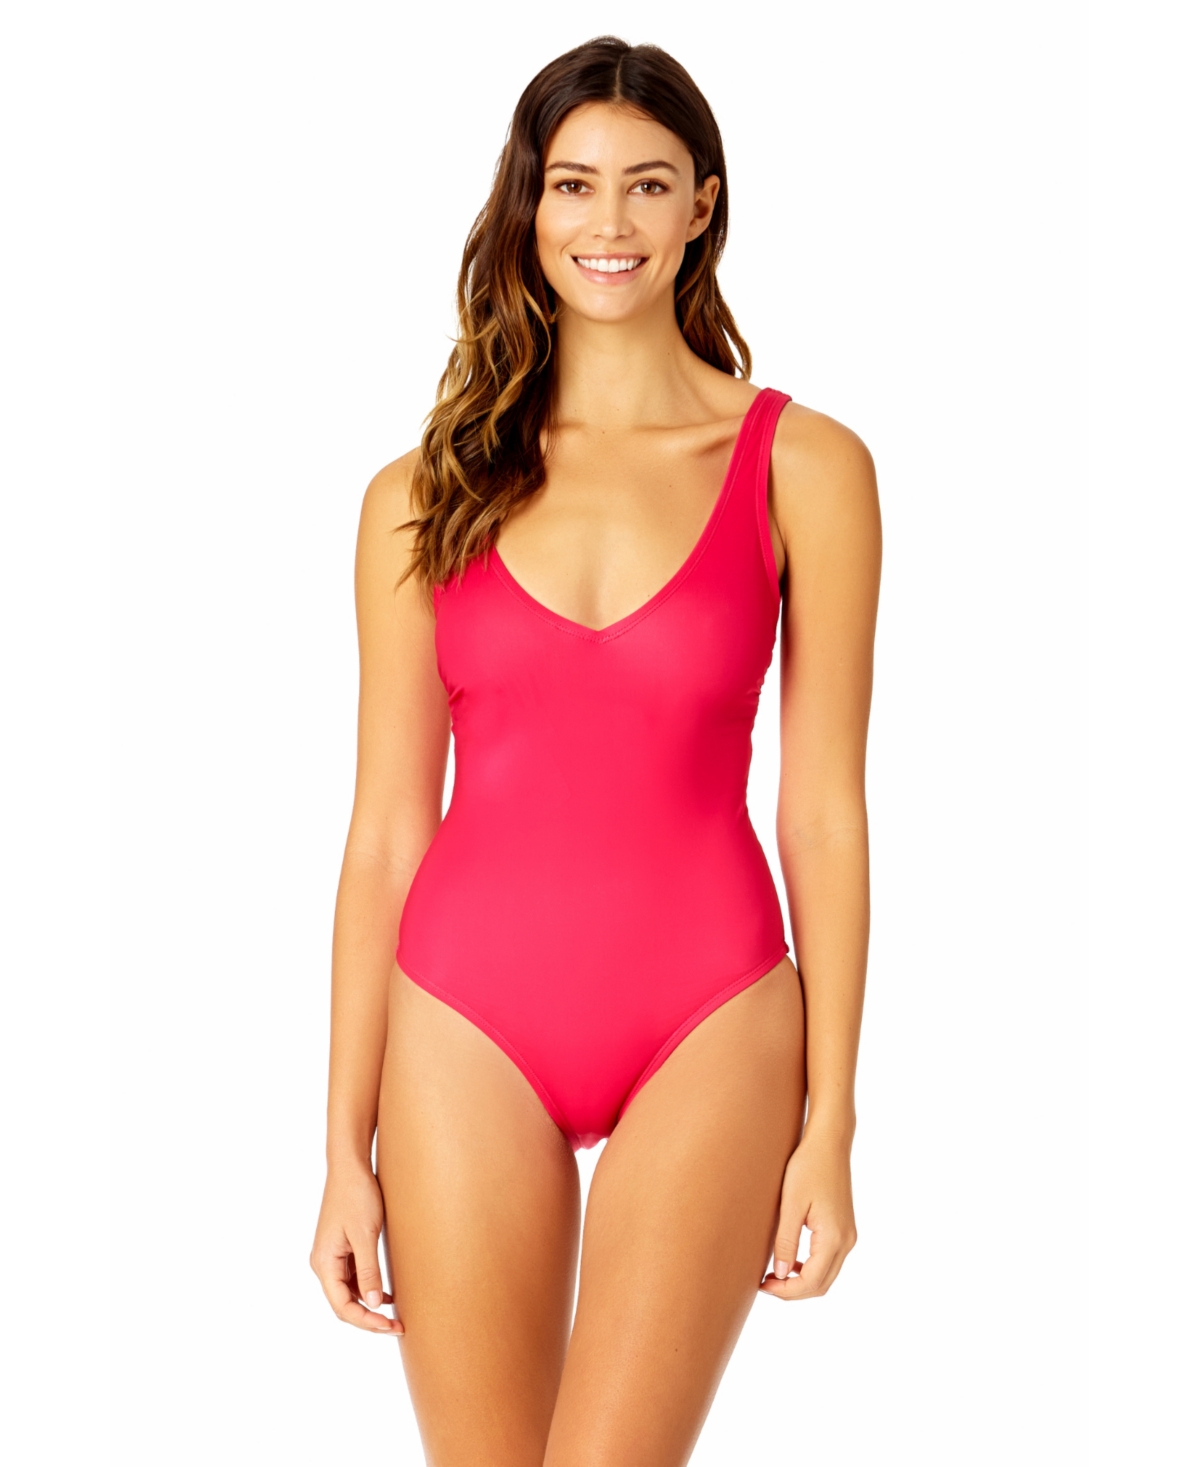 Women's Lace Up Compression One Piece Swimsuit - Violet glow